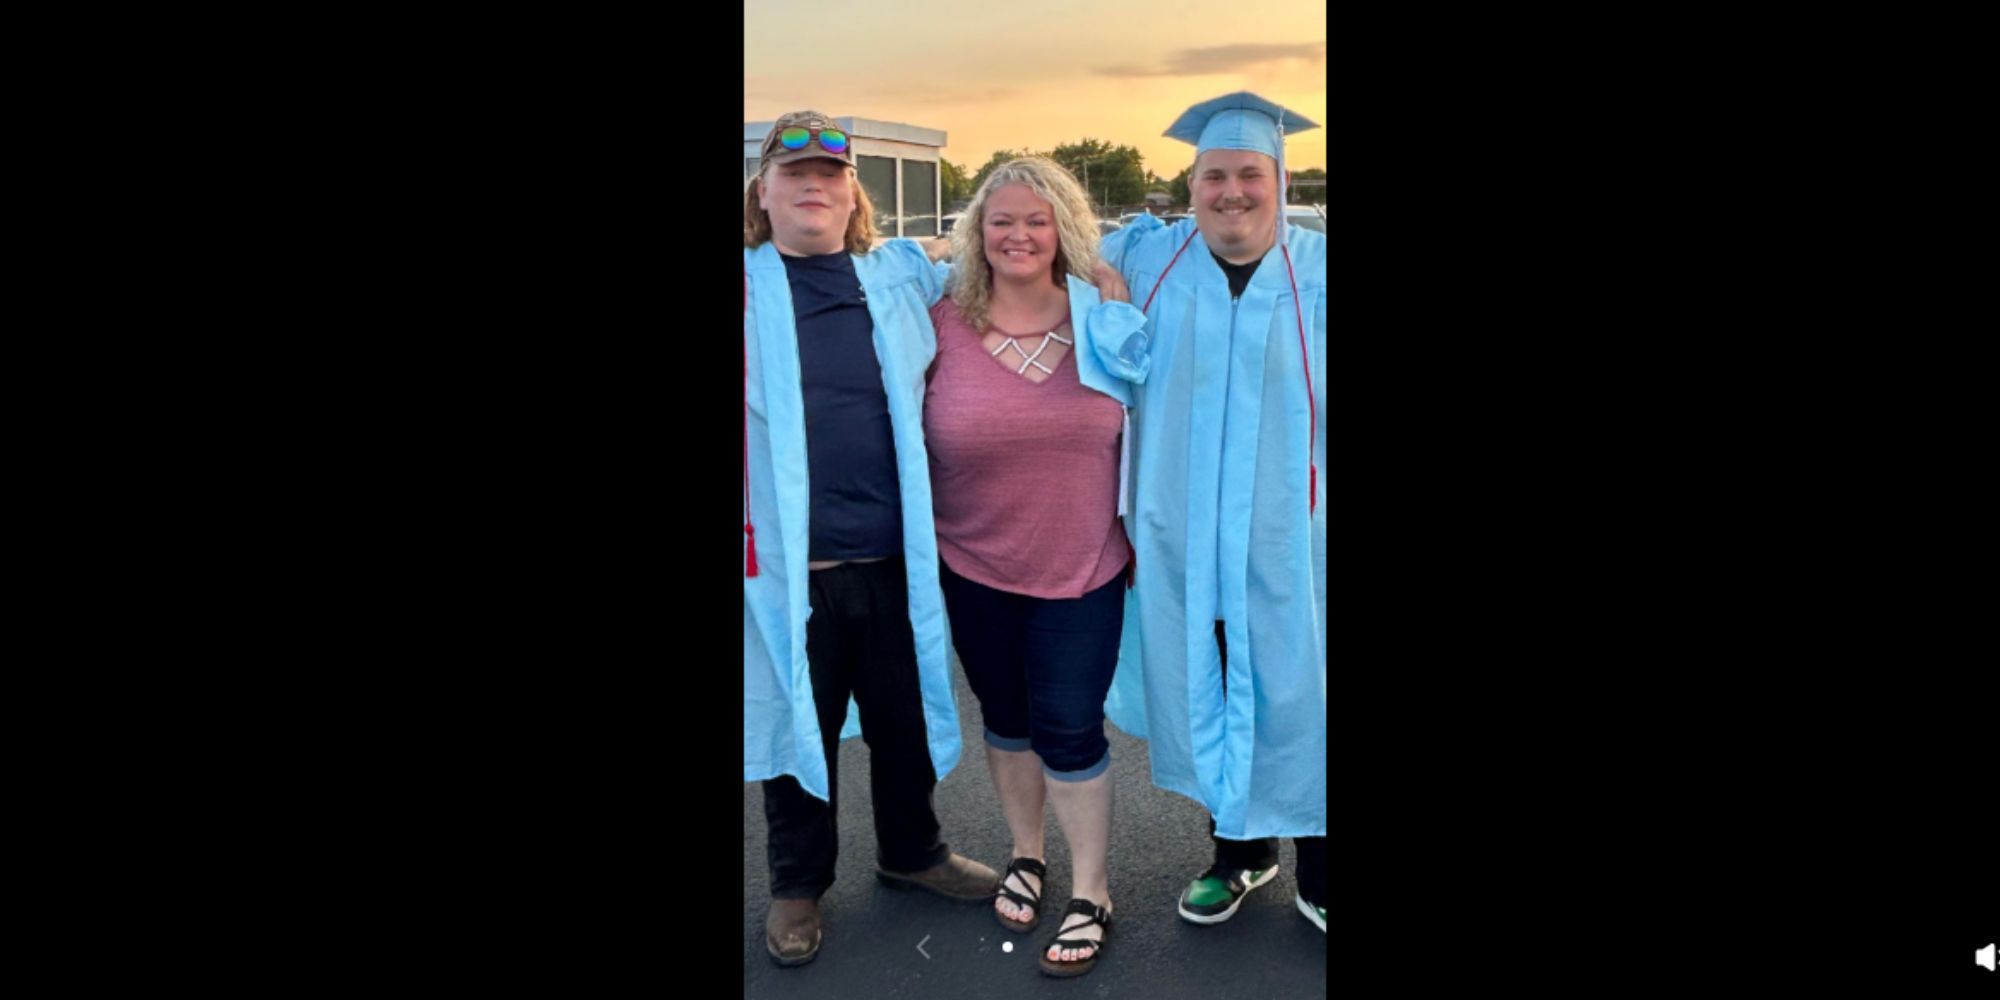 1000-lb Sisters Amanda Halterman & 2 sons at a high school graduation, and her sons are wearing blue caps and gowns